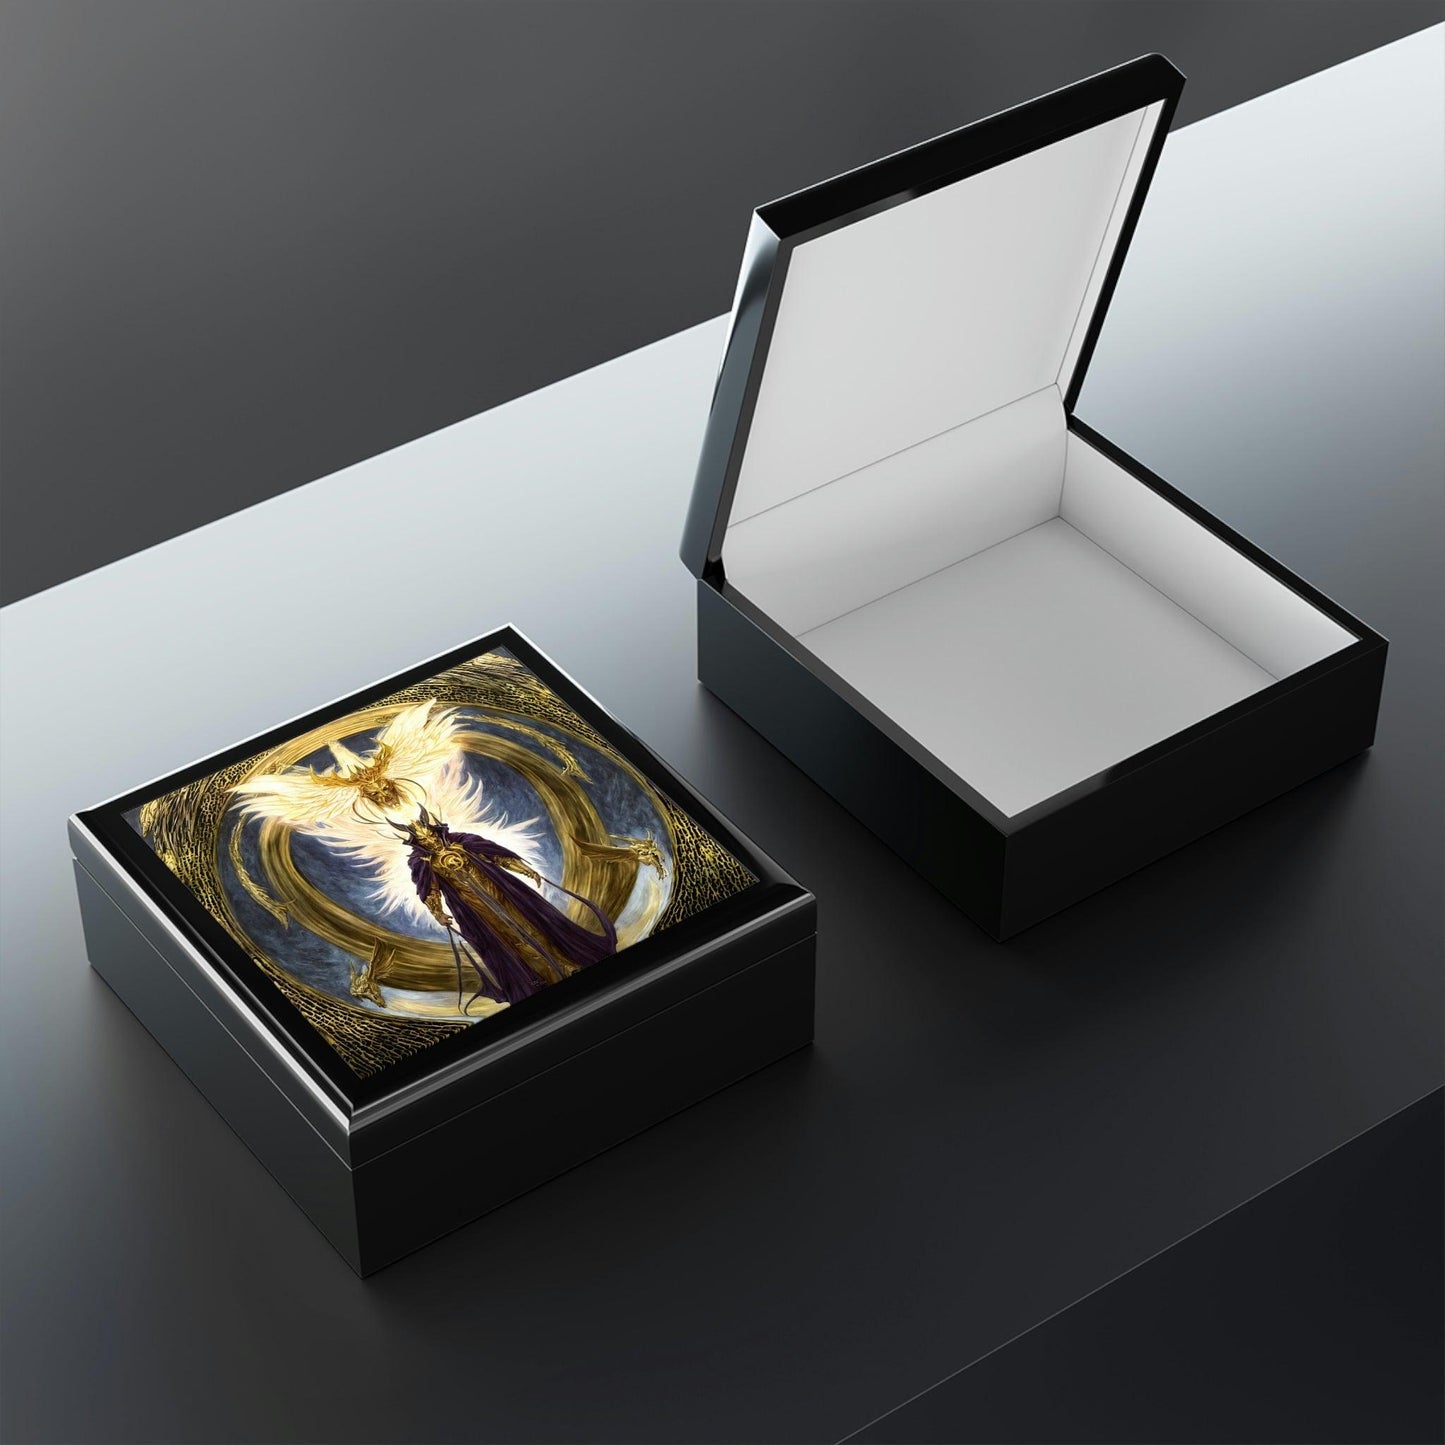 Lucifers-Jewelry-Box-to-store-your-talismans-and-rings-3